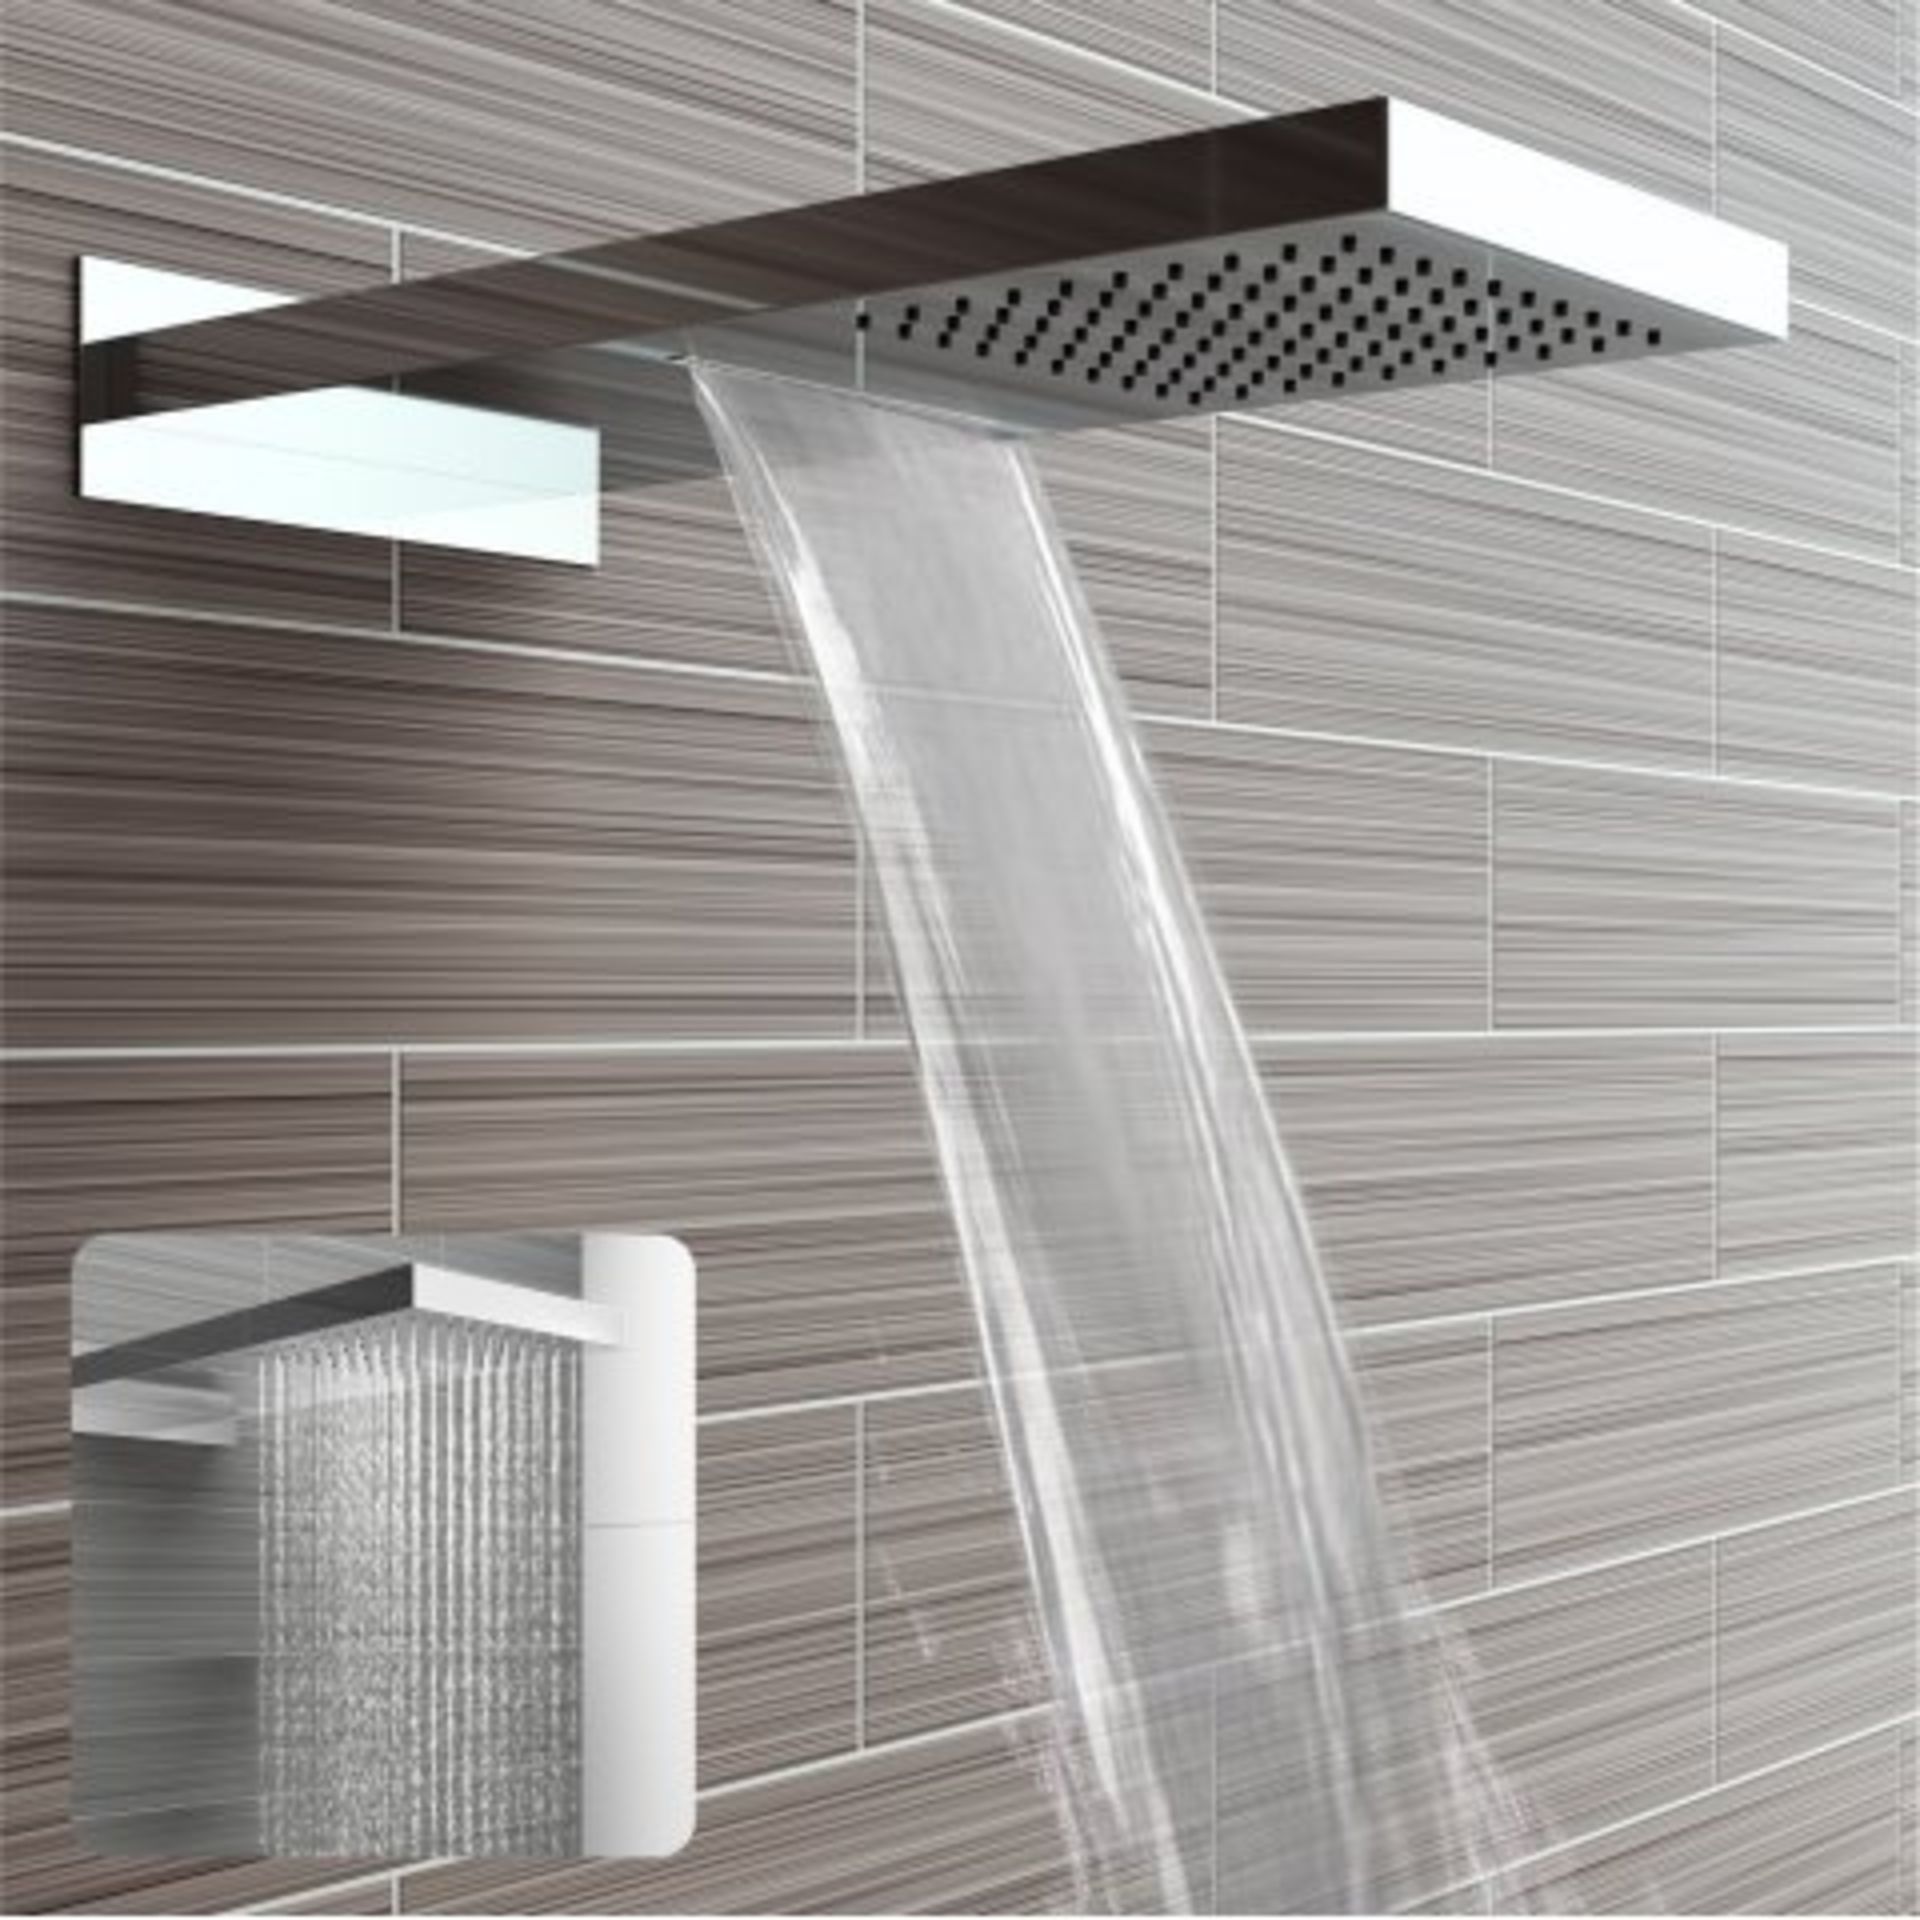 (J213) Stainless Steel 230x550mm Waterfall Shower Head. RRP £459.99. "What An Experience": Enjoy - Image 2 of 4